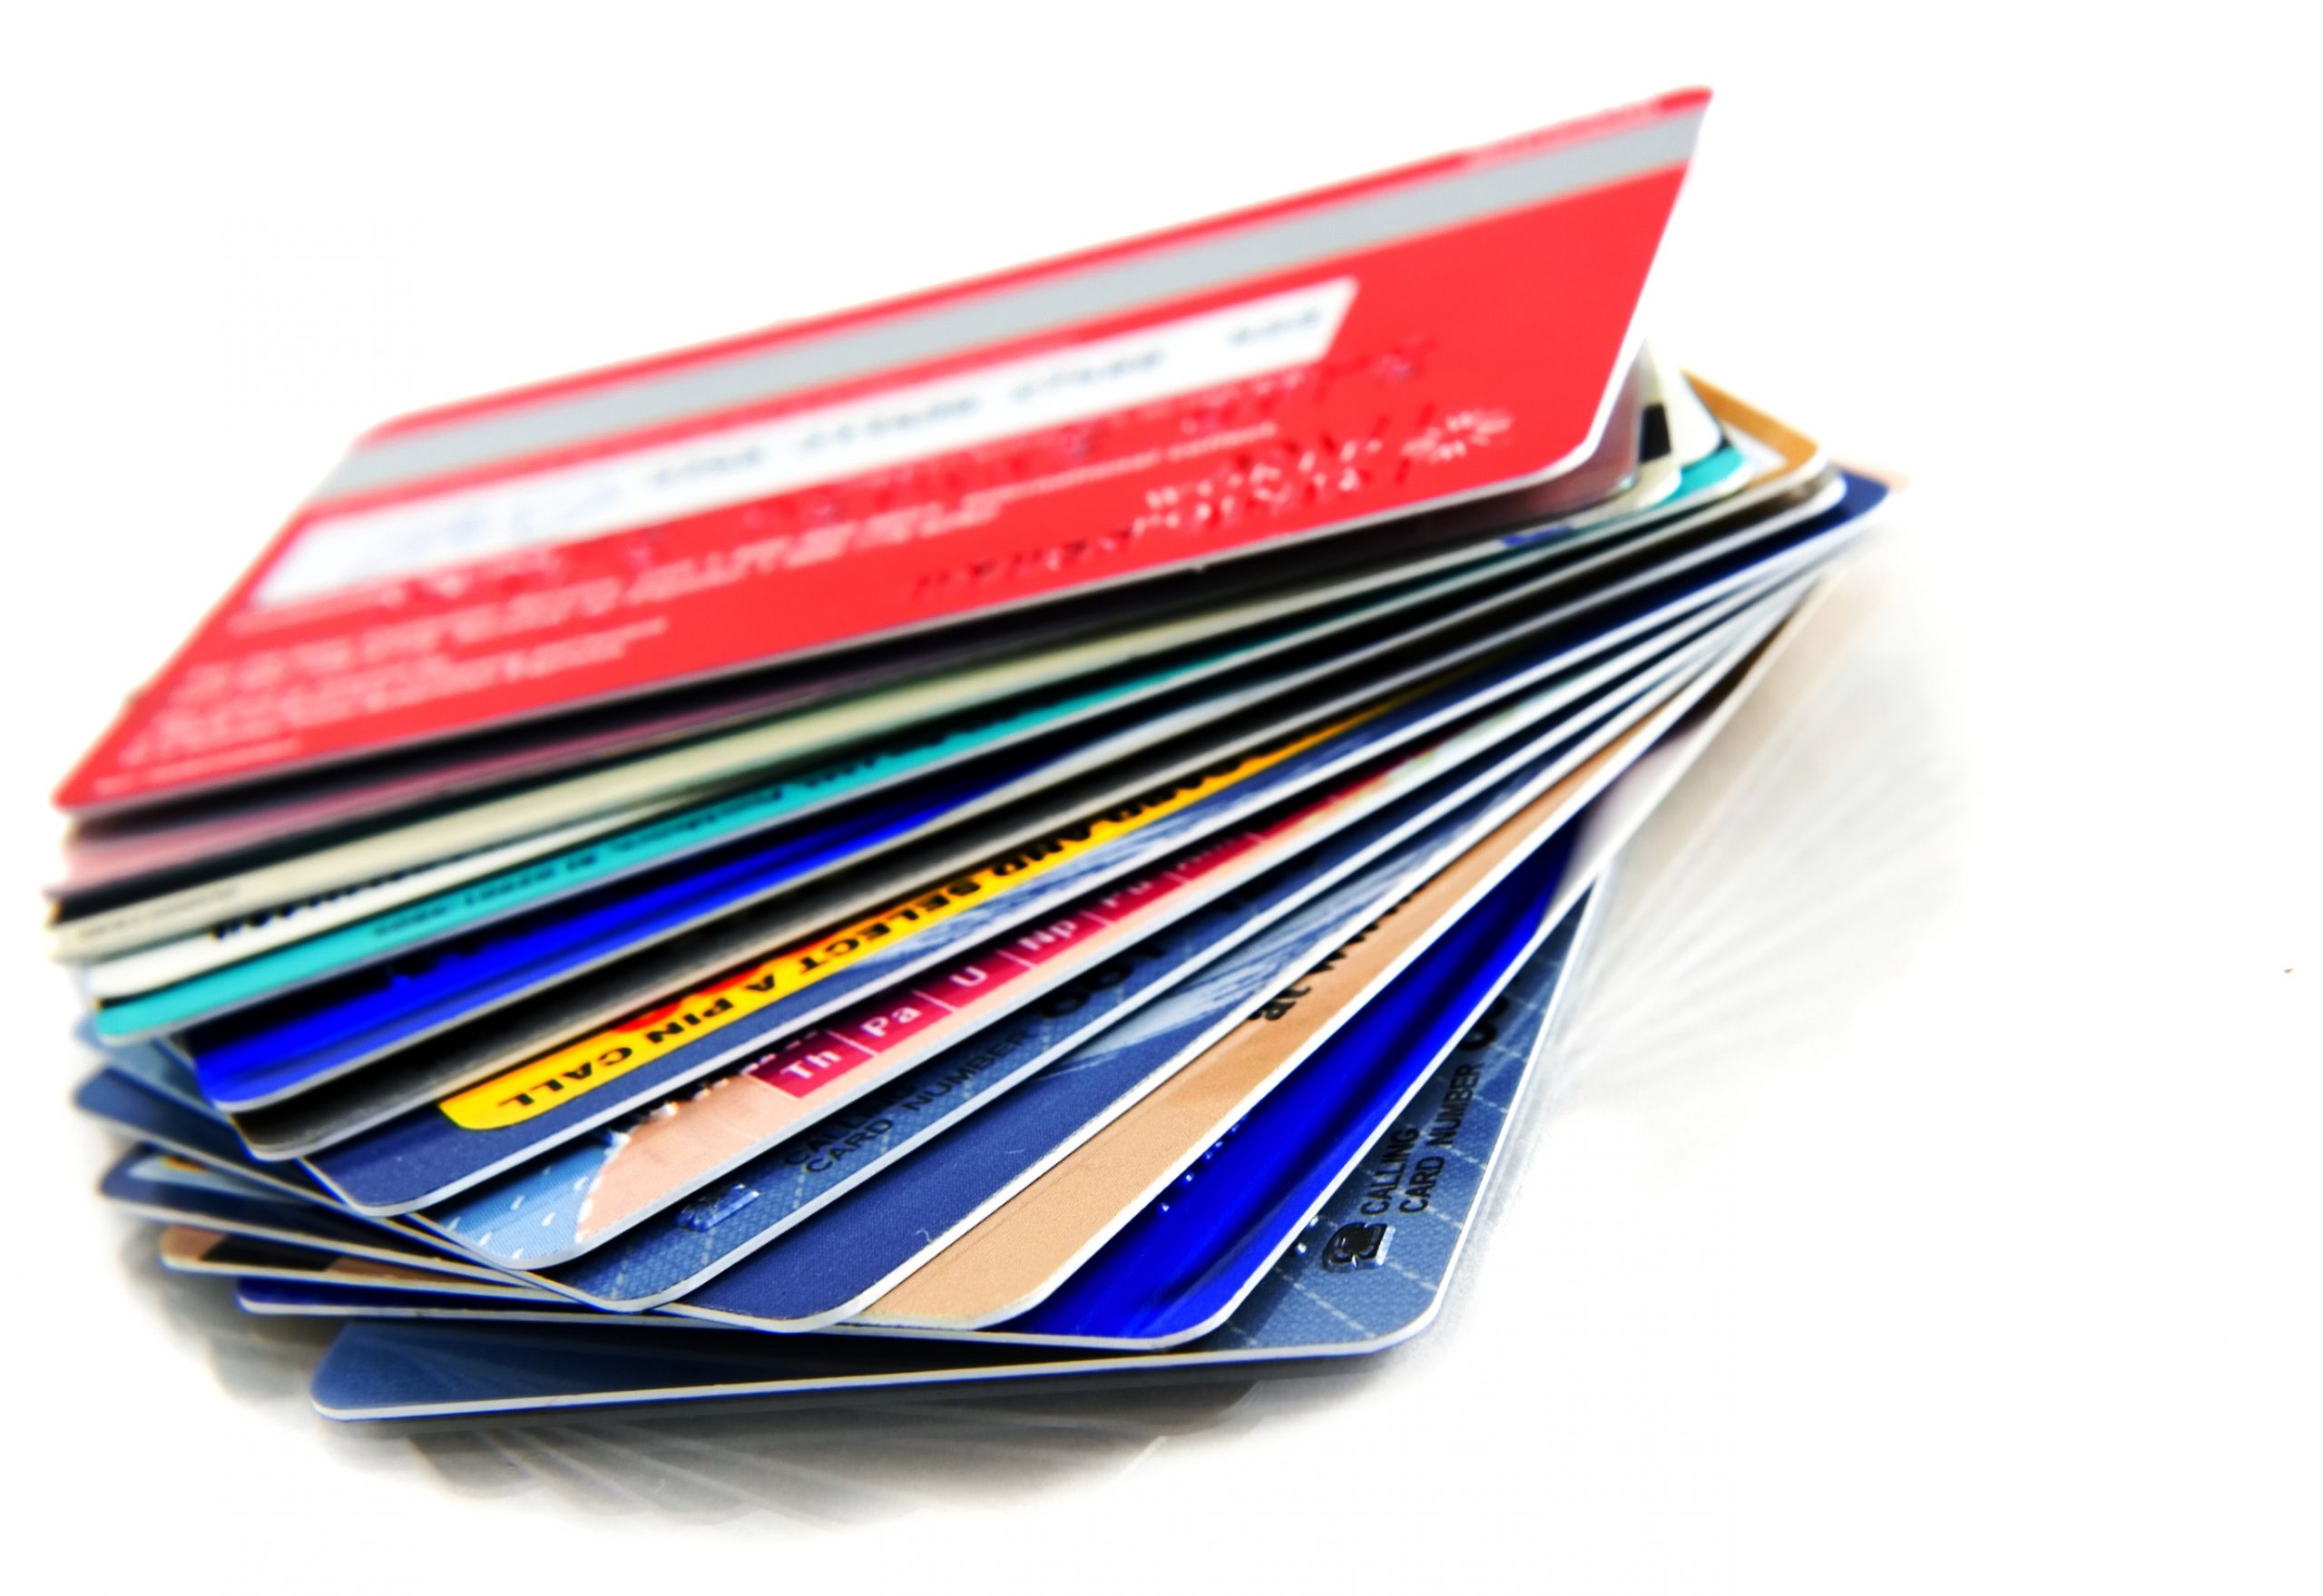 3-things-to-watch-out-when-choosing-a-cash-back-credit-card